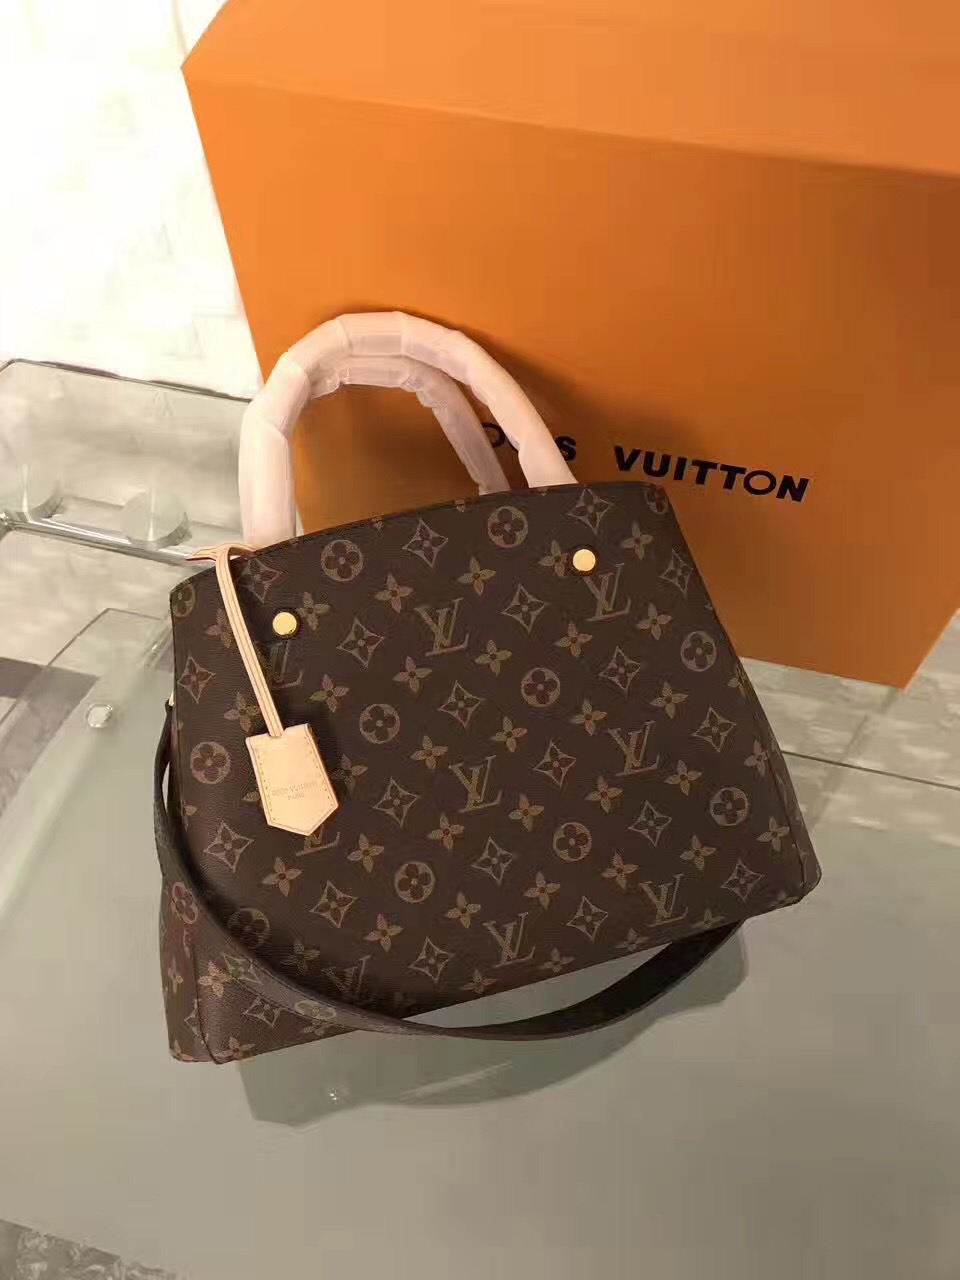 LV Louis Vuitton Freedom Tote Handbags Leather M54842 Real bags Navy ...